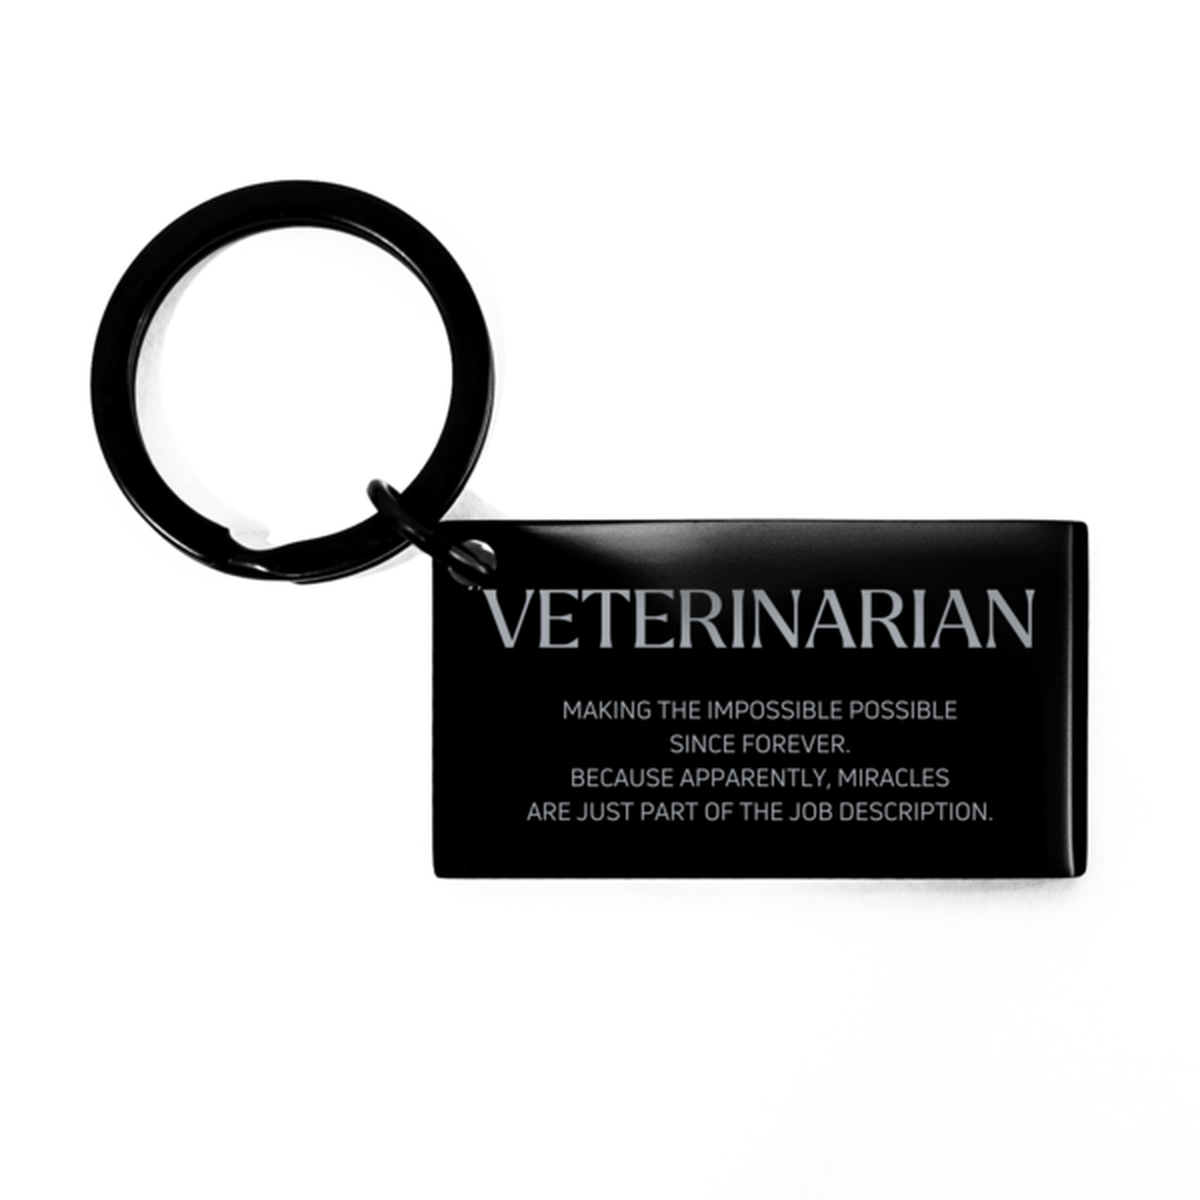 Funny Veterinarian Gifts, Miracles are just part of the job description, Inspirational Birthday Keychain For Veterinarian, Men, Women, Coworkers, Friends, Boss